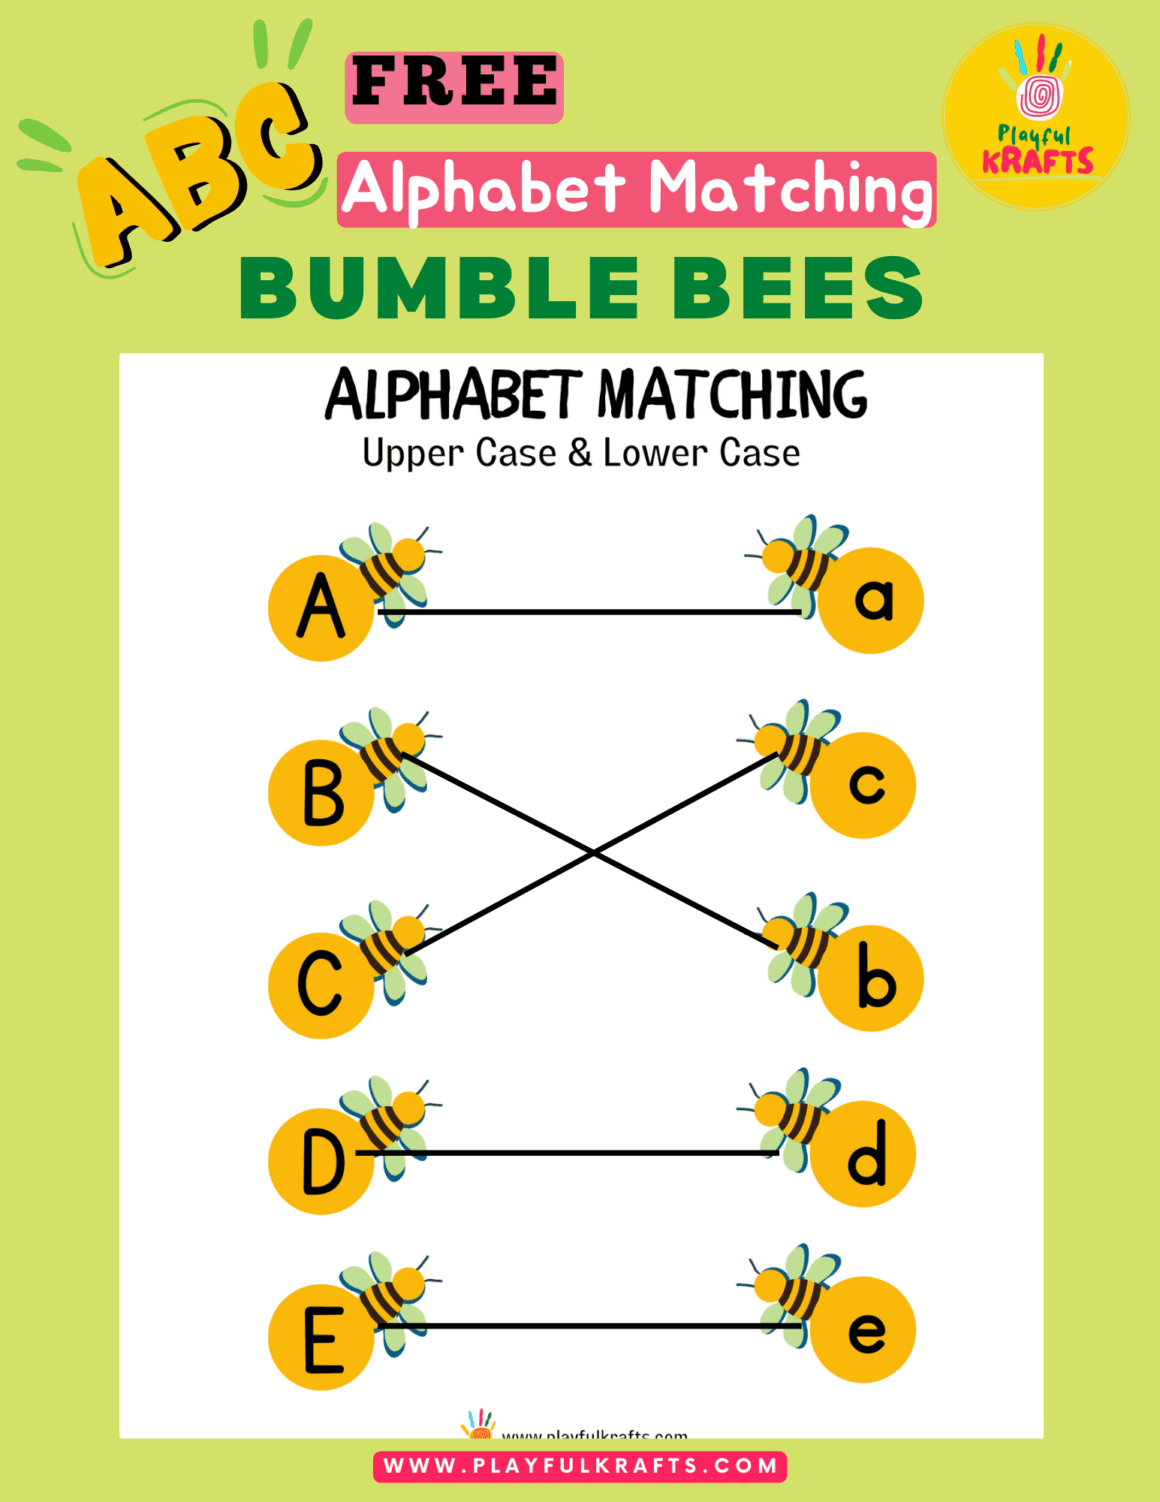 Showing-how-to-match-bumble-bee-alphabets